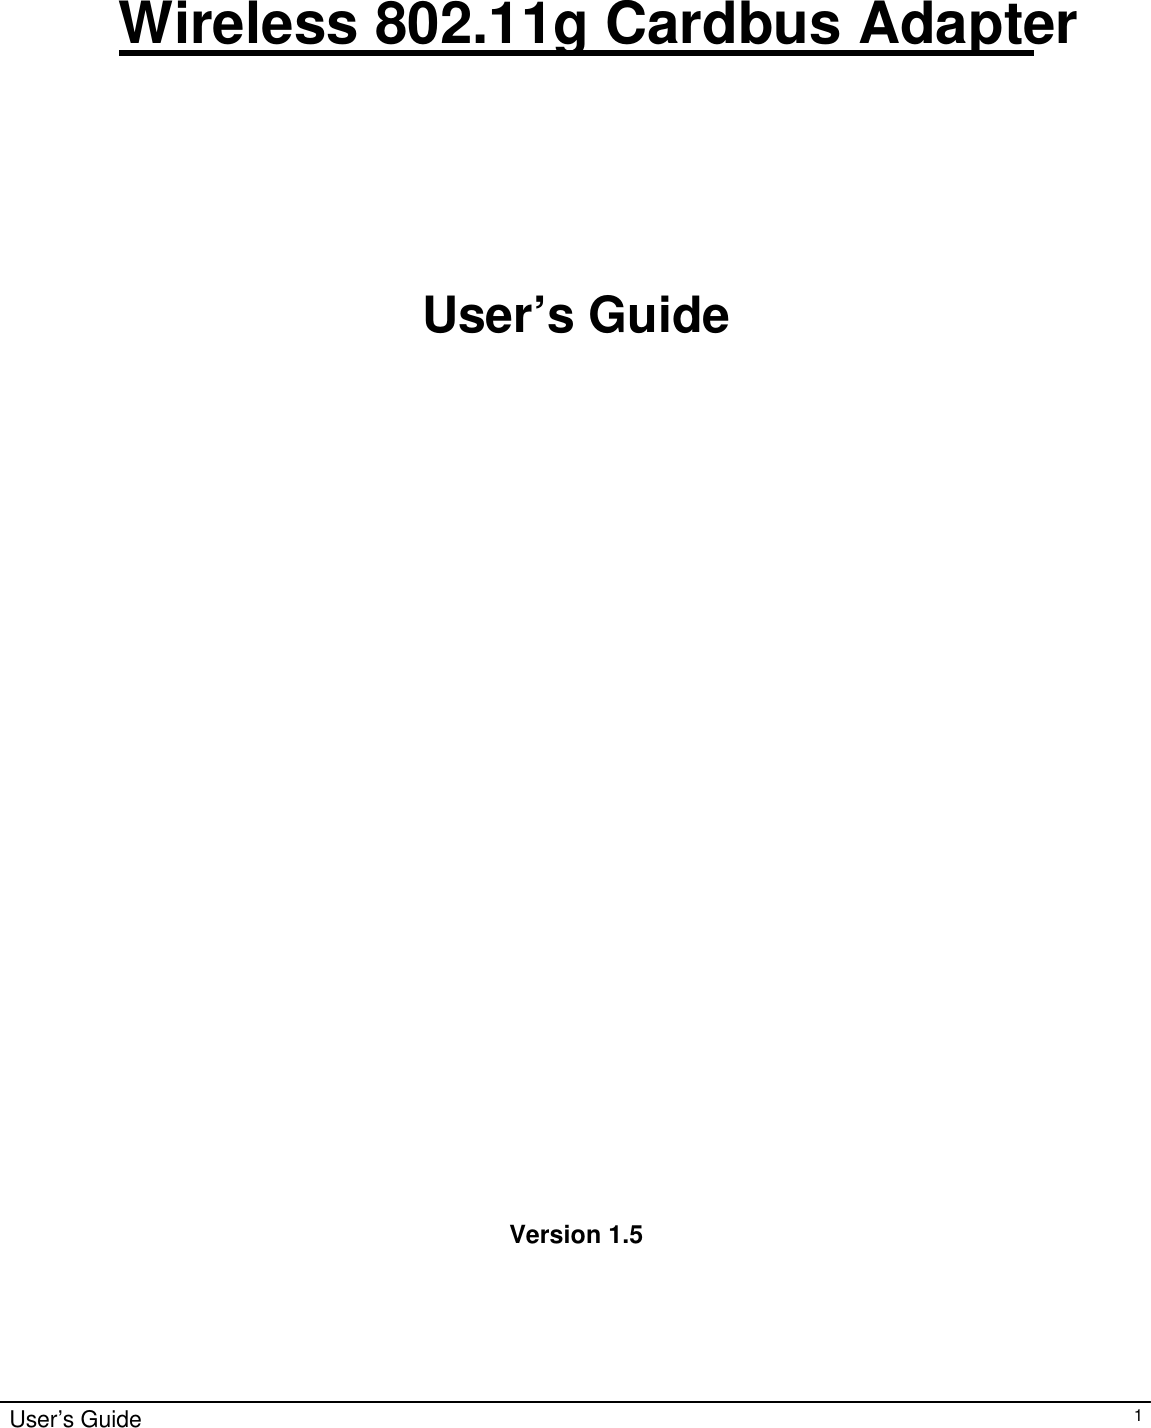                                                                                                                                                                                                                                                                                                                                        User’s Guide   1    Wireless 802.11g Cardbus Adapter     User’s Guide                              Version 1.5   